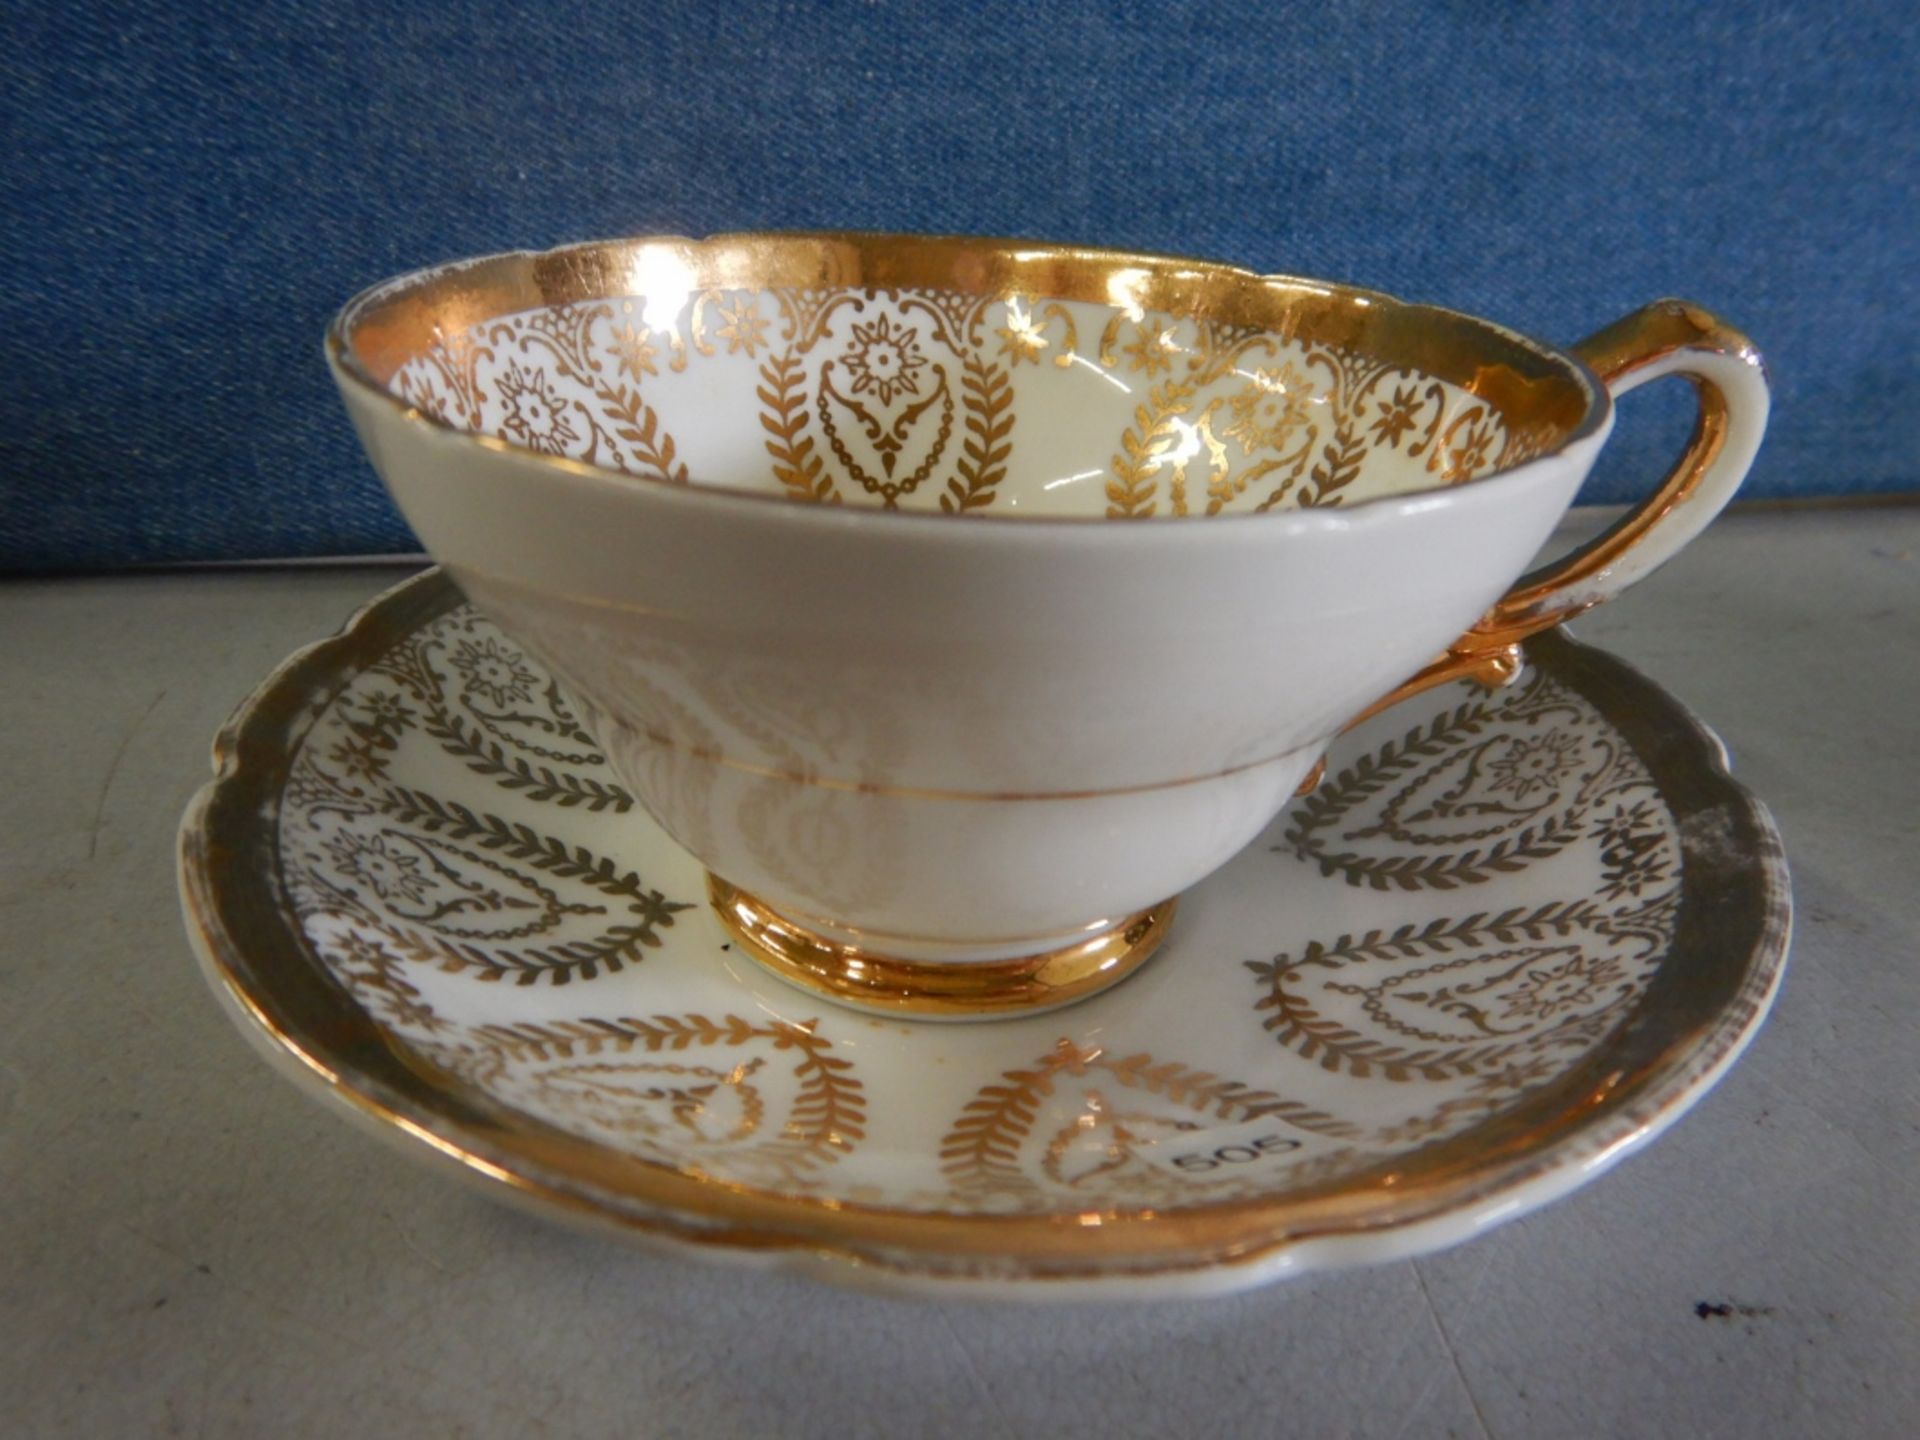 ANTIQUE TEACUPS & SAUCERS - MADE IN ENGLAND - LOT OF 2 - FINE BONE CHINA EST. 1875 "STANLEY" - - Image 3 of 13